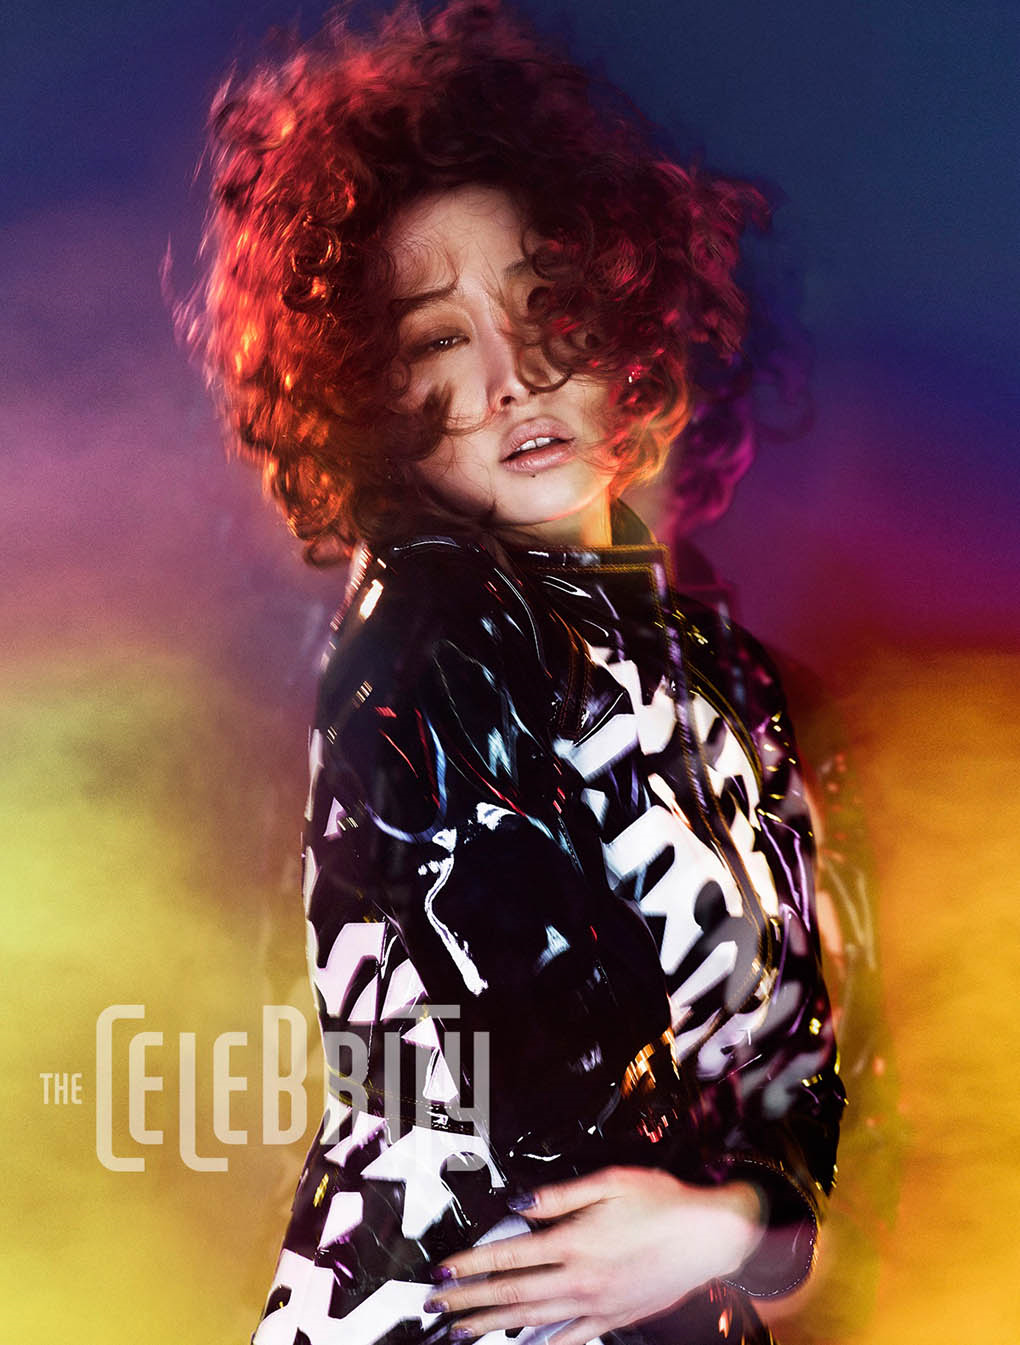 twenty2 blog: Nicole Jung in The Celebrity January 2015 | Fashion and Beauty